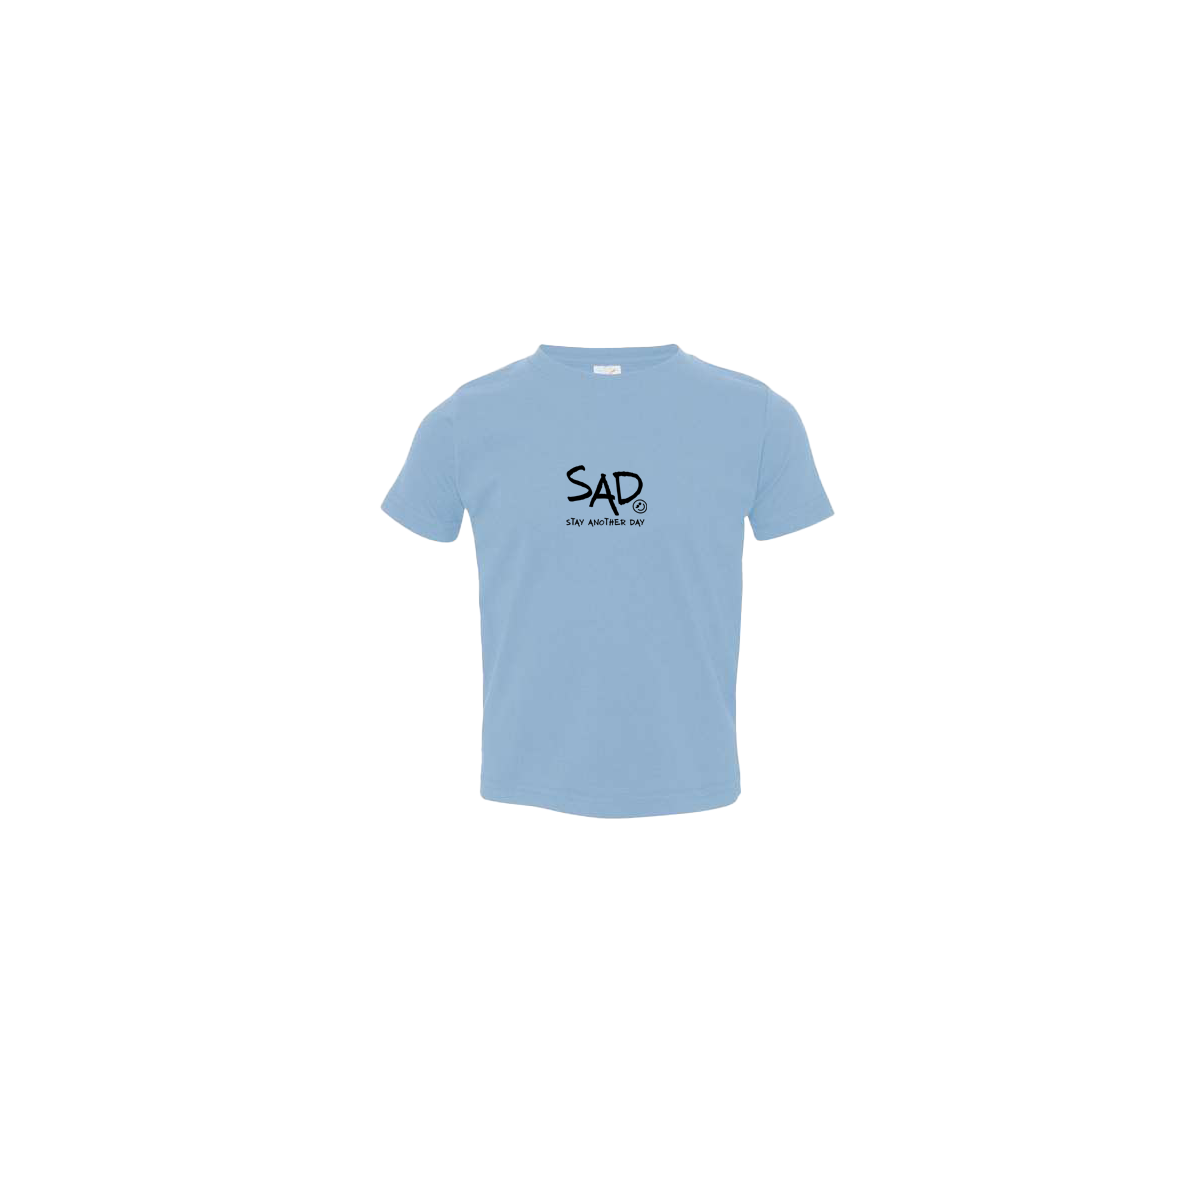 Stay Another Day Logo Screen Printed Light Blue Toddler T-Shirt